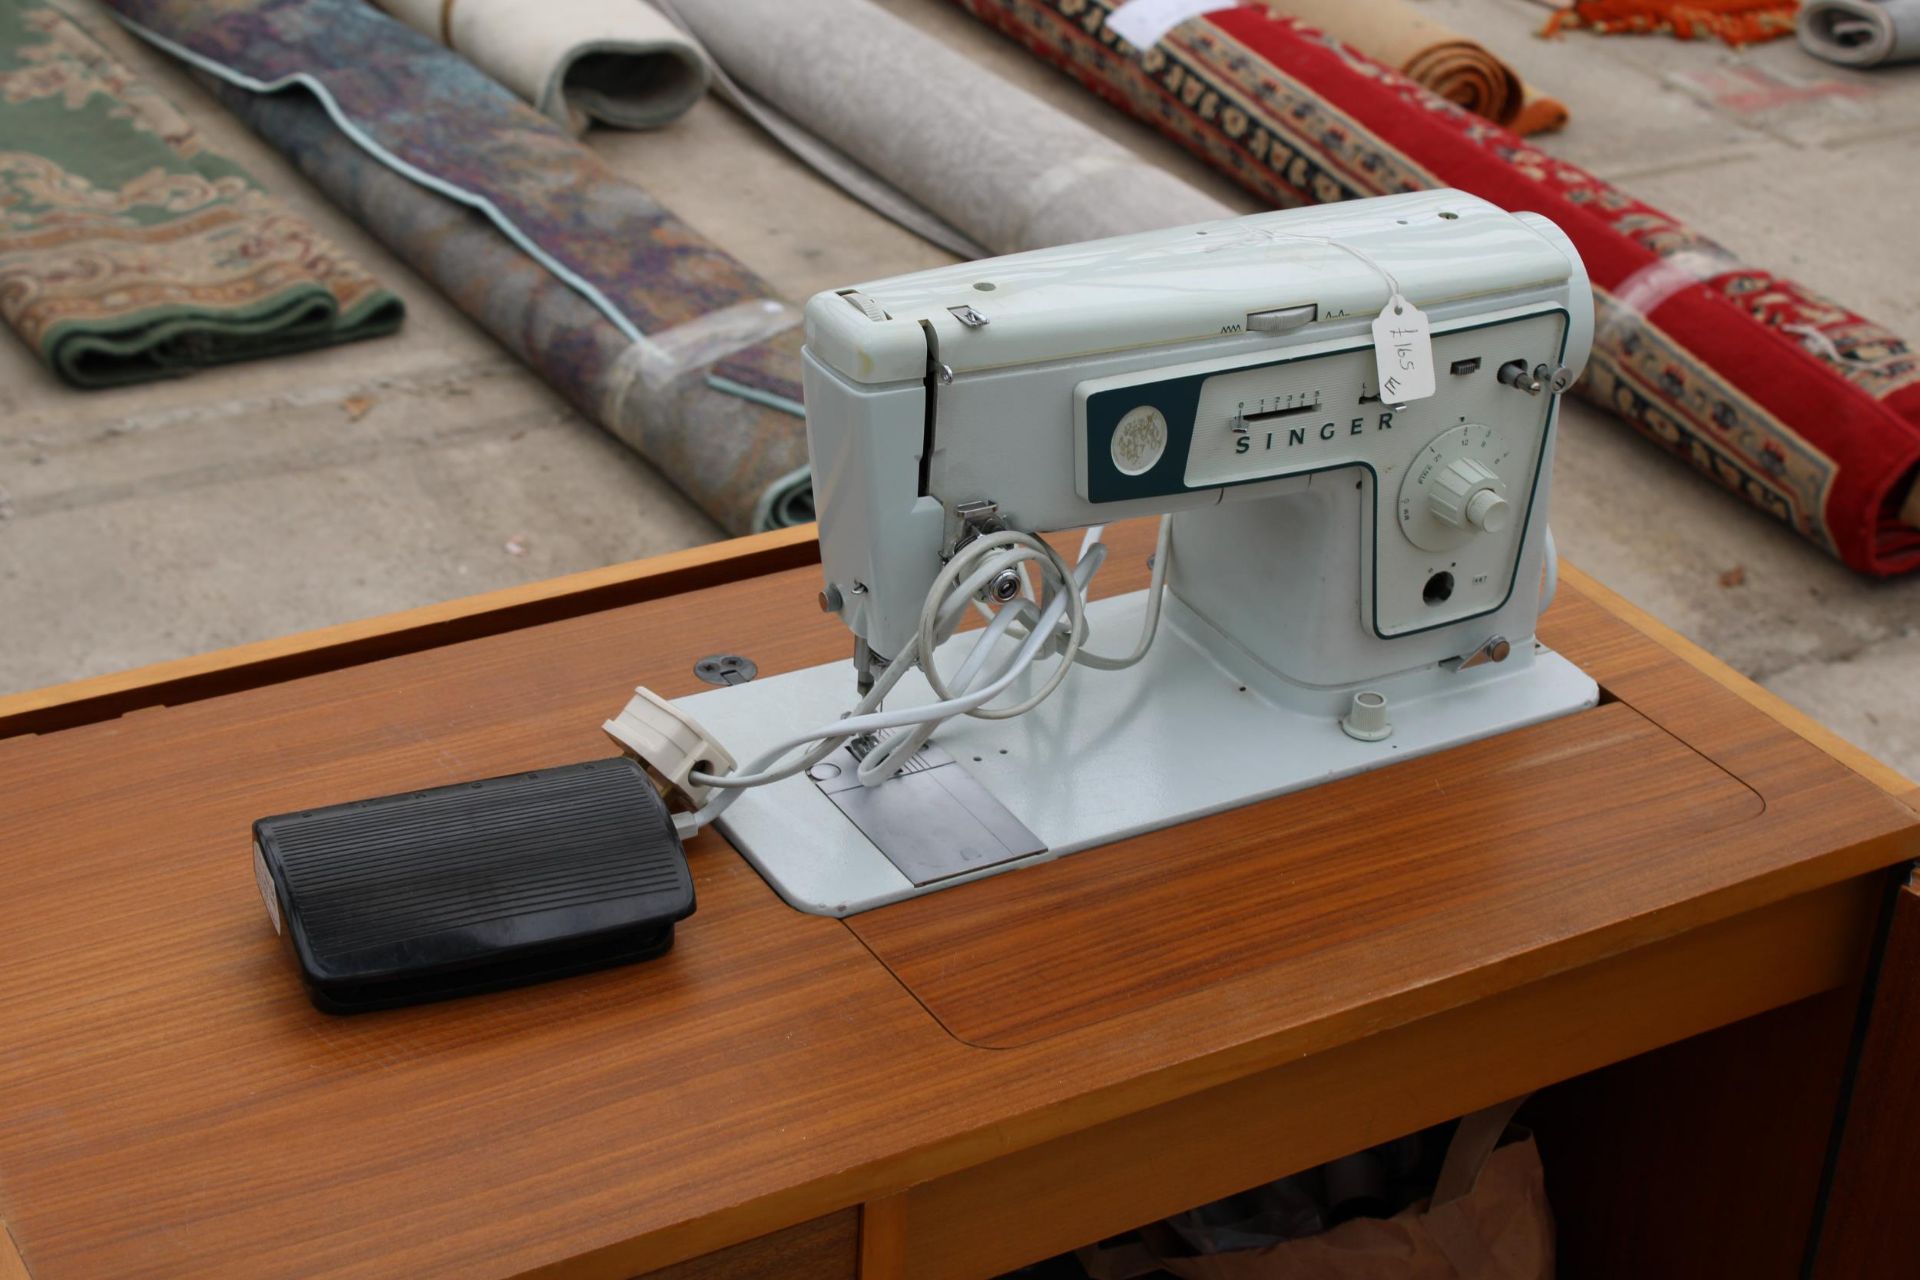 A RETRO TEAK SEWING CABINET WITH ELECTRIC SINGER SEWING MACHINE AND ACCESSORIES - Image 2 of 5